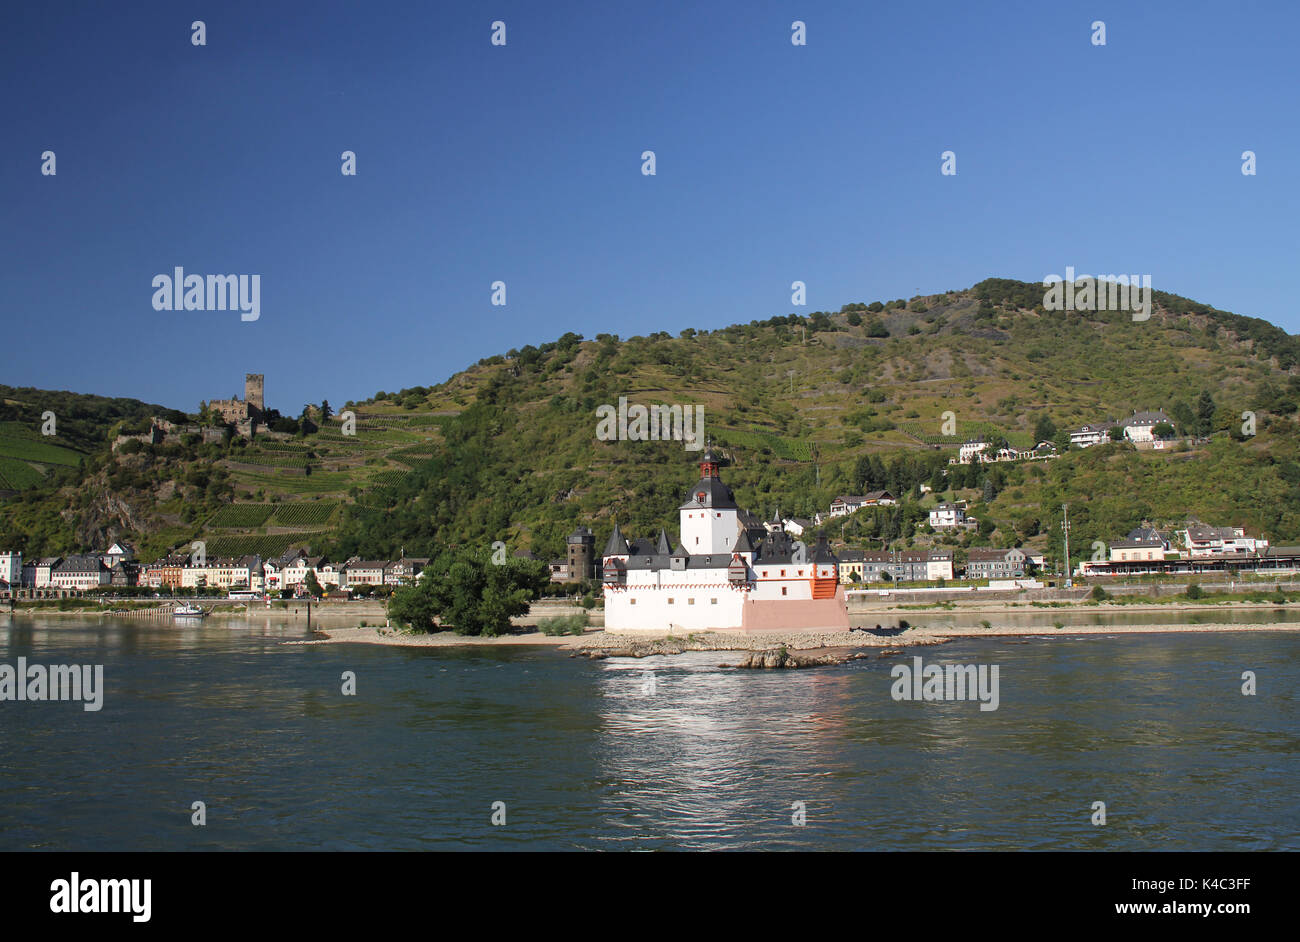 Rhine With Pfalzgrafenstein Castle On The Island Of Falkenau In The Rhine, Formerly A Toll Castle In The Upper Middle Rhine Valley, Also Called Pfalz Bei Kaub. And Gutenfels Castle On The Hill Stock Photo